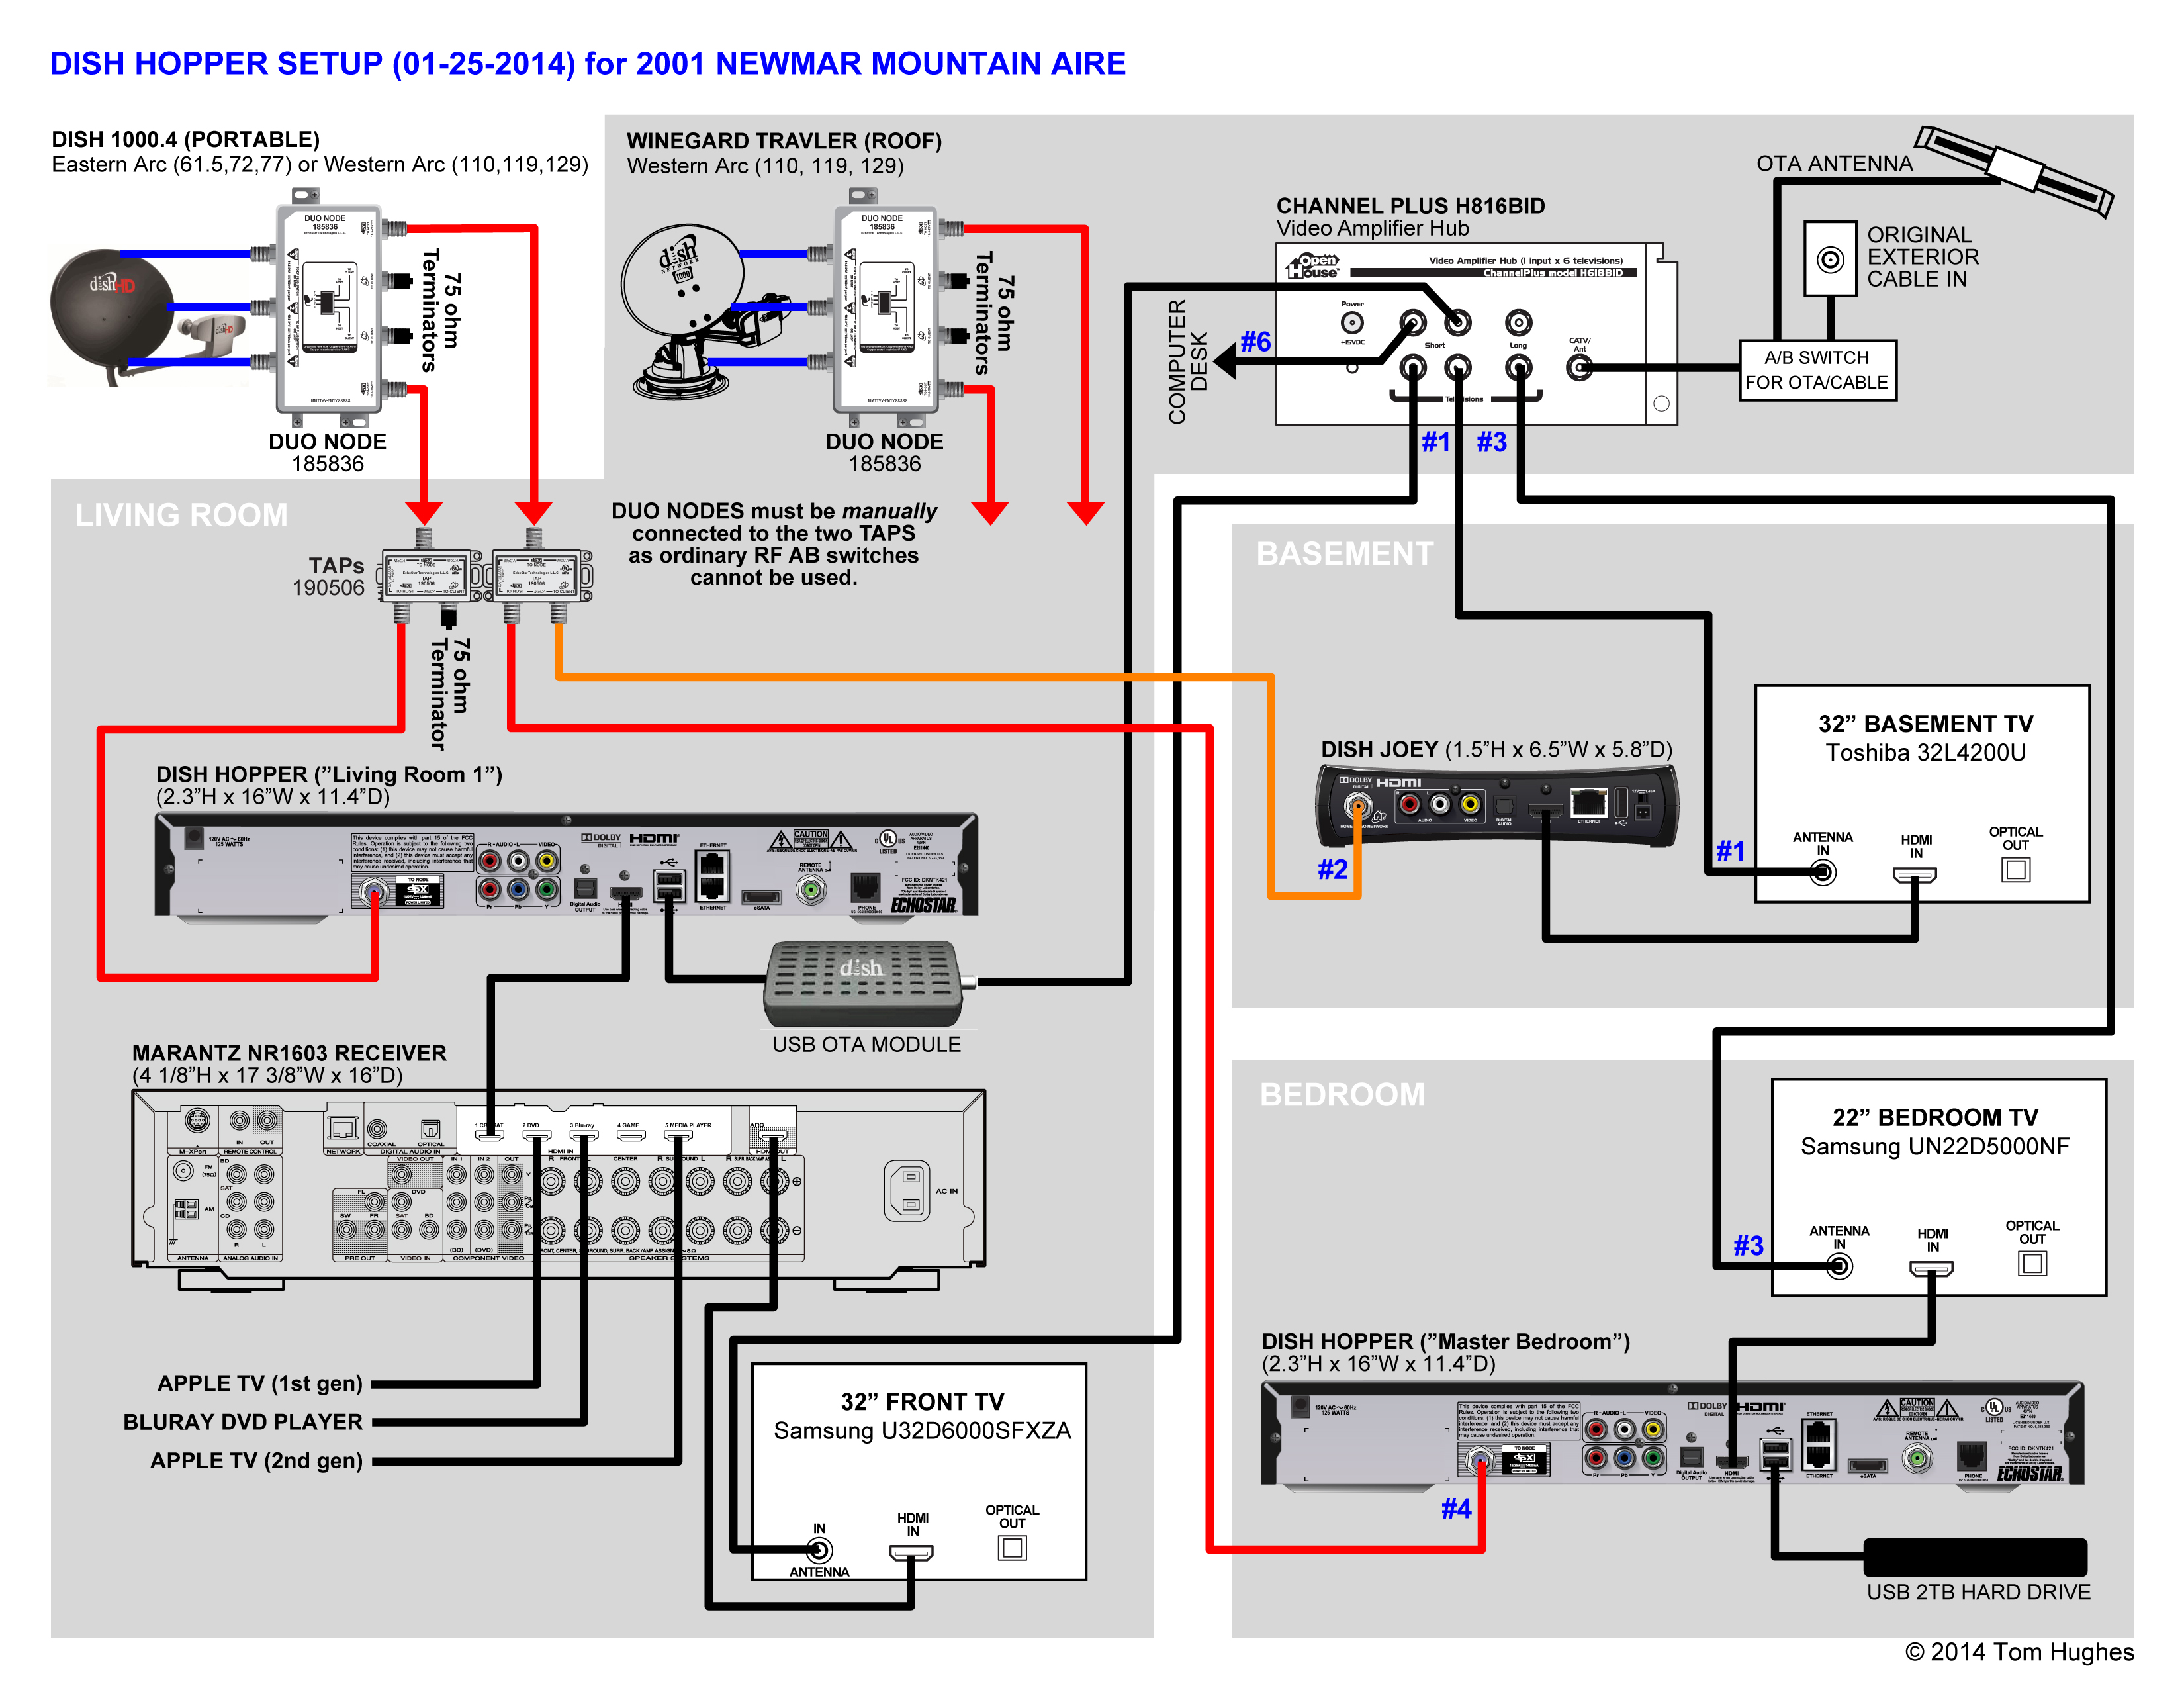 Wiring Diagram For Dish Network Wally dish network joey wiring diagram 